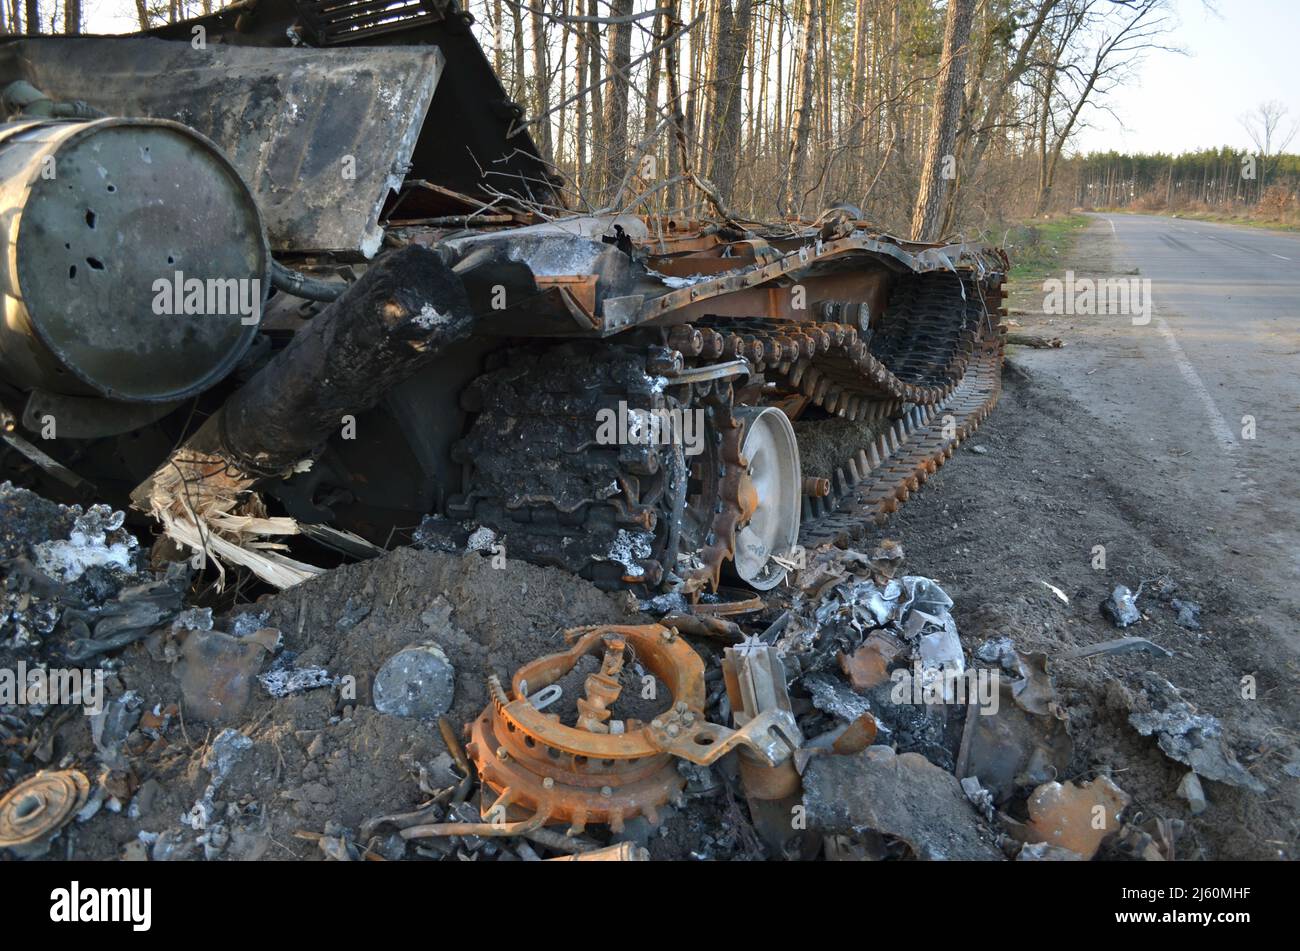 Dmytrivka, Kyiv region, Ukraine - April 14, 2022: Destroyed Russian tank following the Ukrainian forces counter-attacks. War of Russia against Ukraine Stock Photo